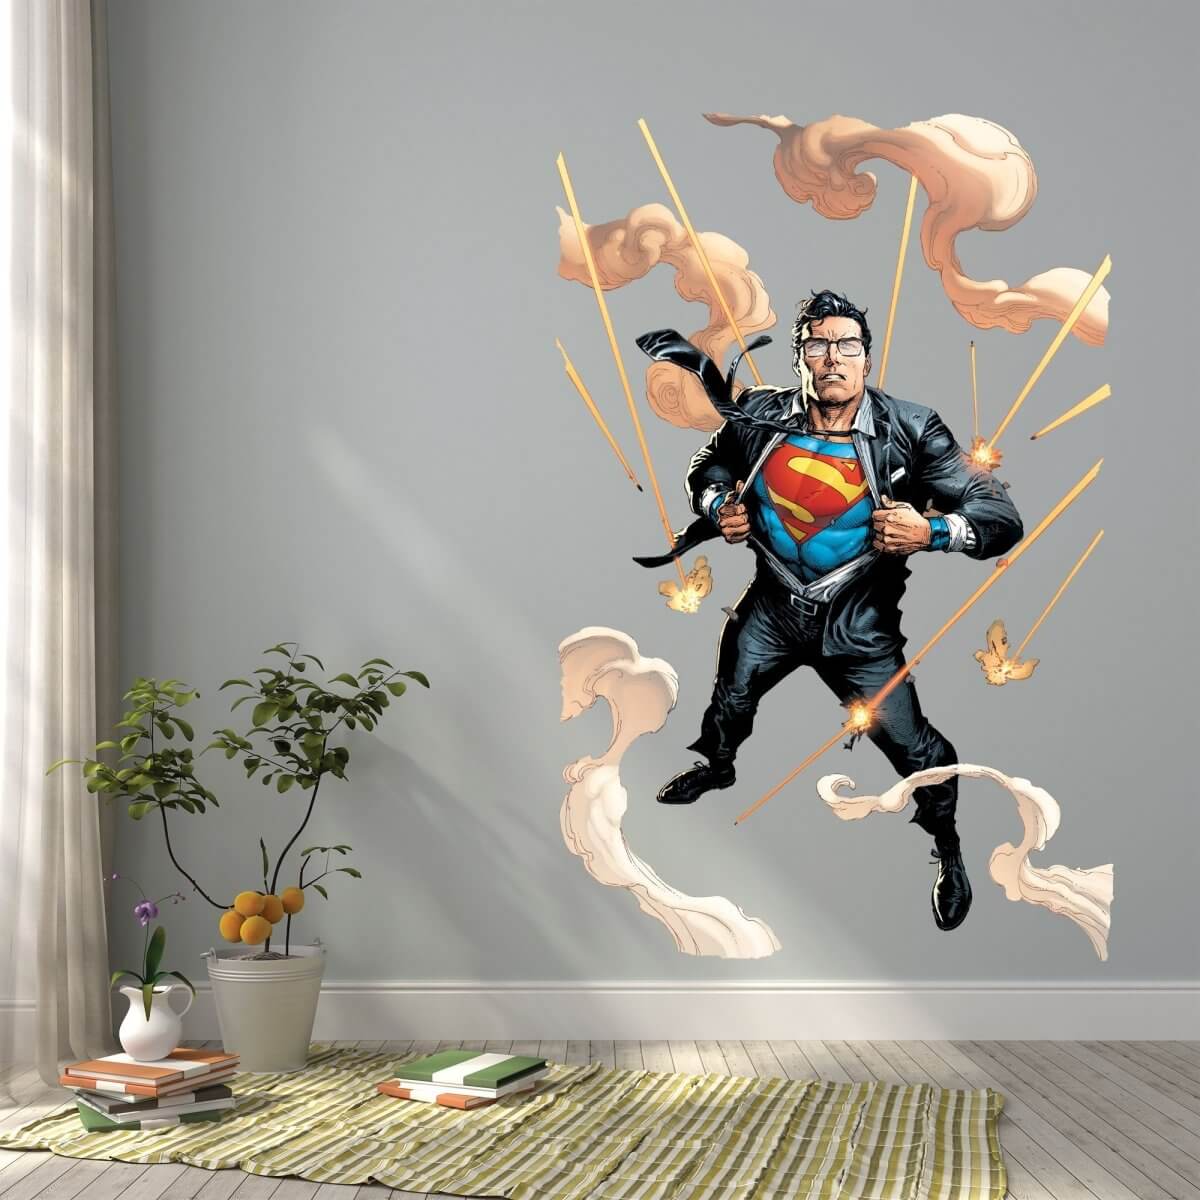 Kismet Decals Action Comics #961 Comic Cover Series Licensed Wall Sticker - Easy DIY Home & Room Decor Wall Art - Kismet Decals